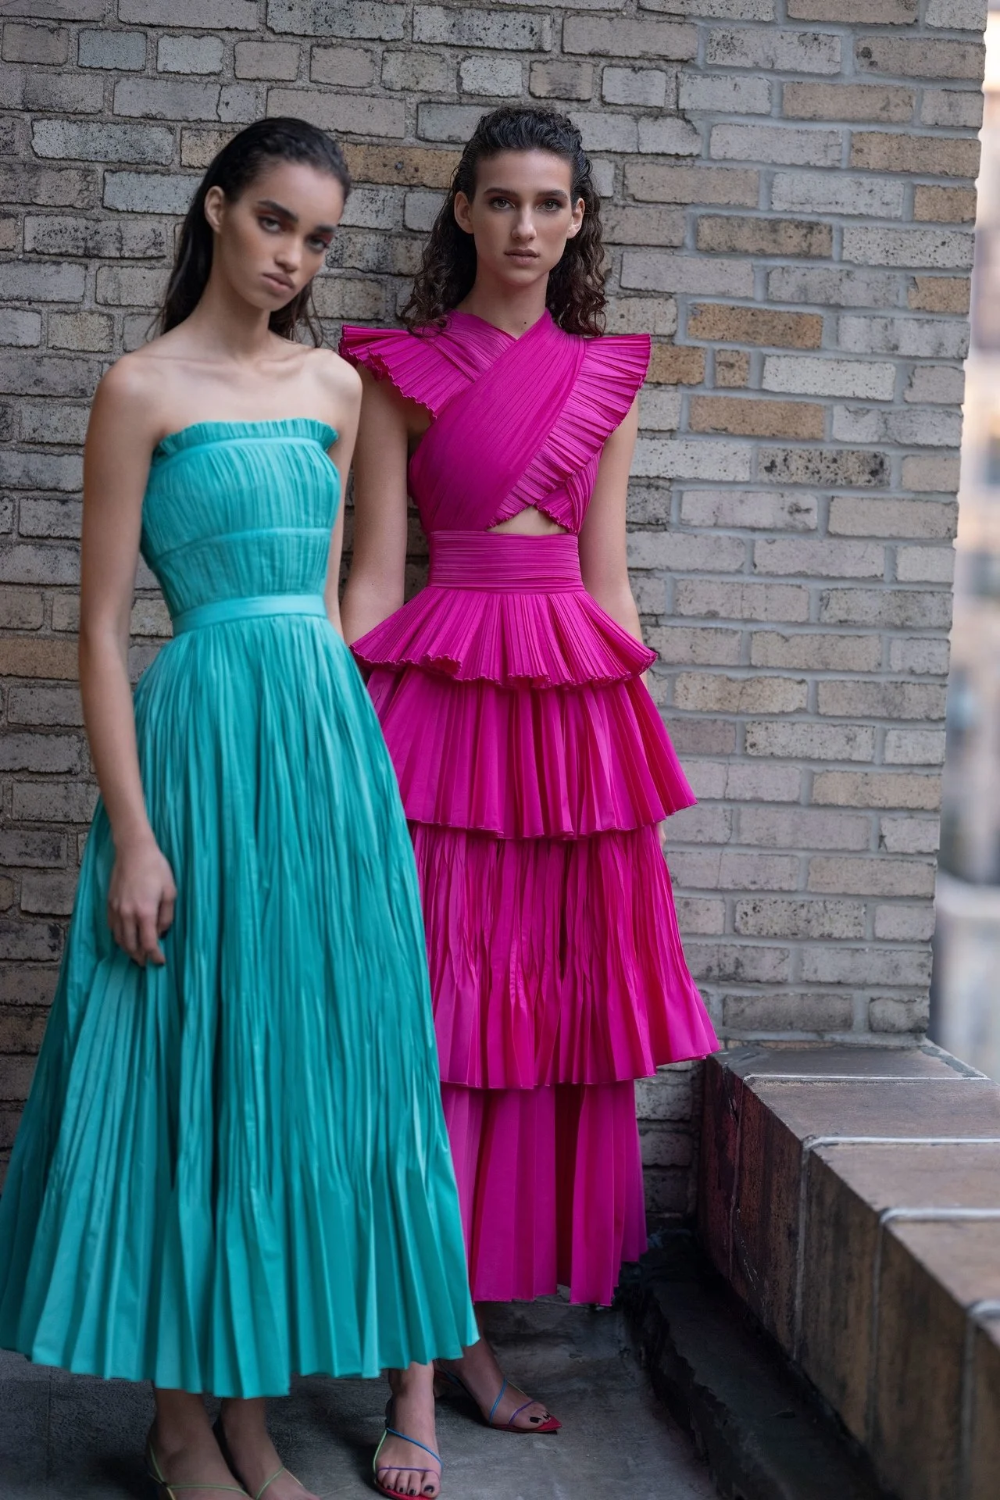 The Top Trends of Pre-Fall 2020 - The Top Trends of Pre-Fall 2020 -   17 style Chic party ideas